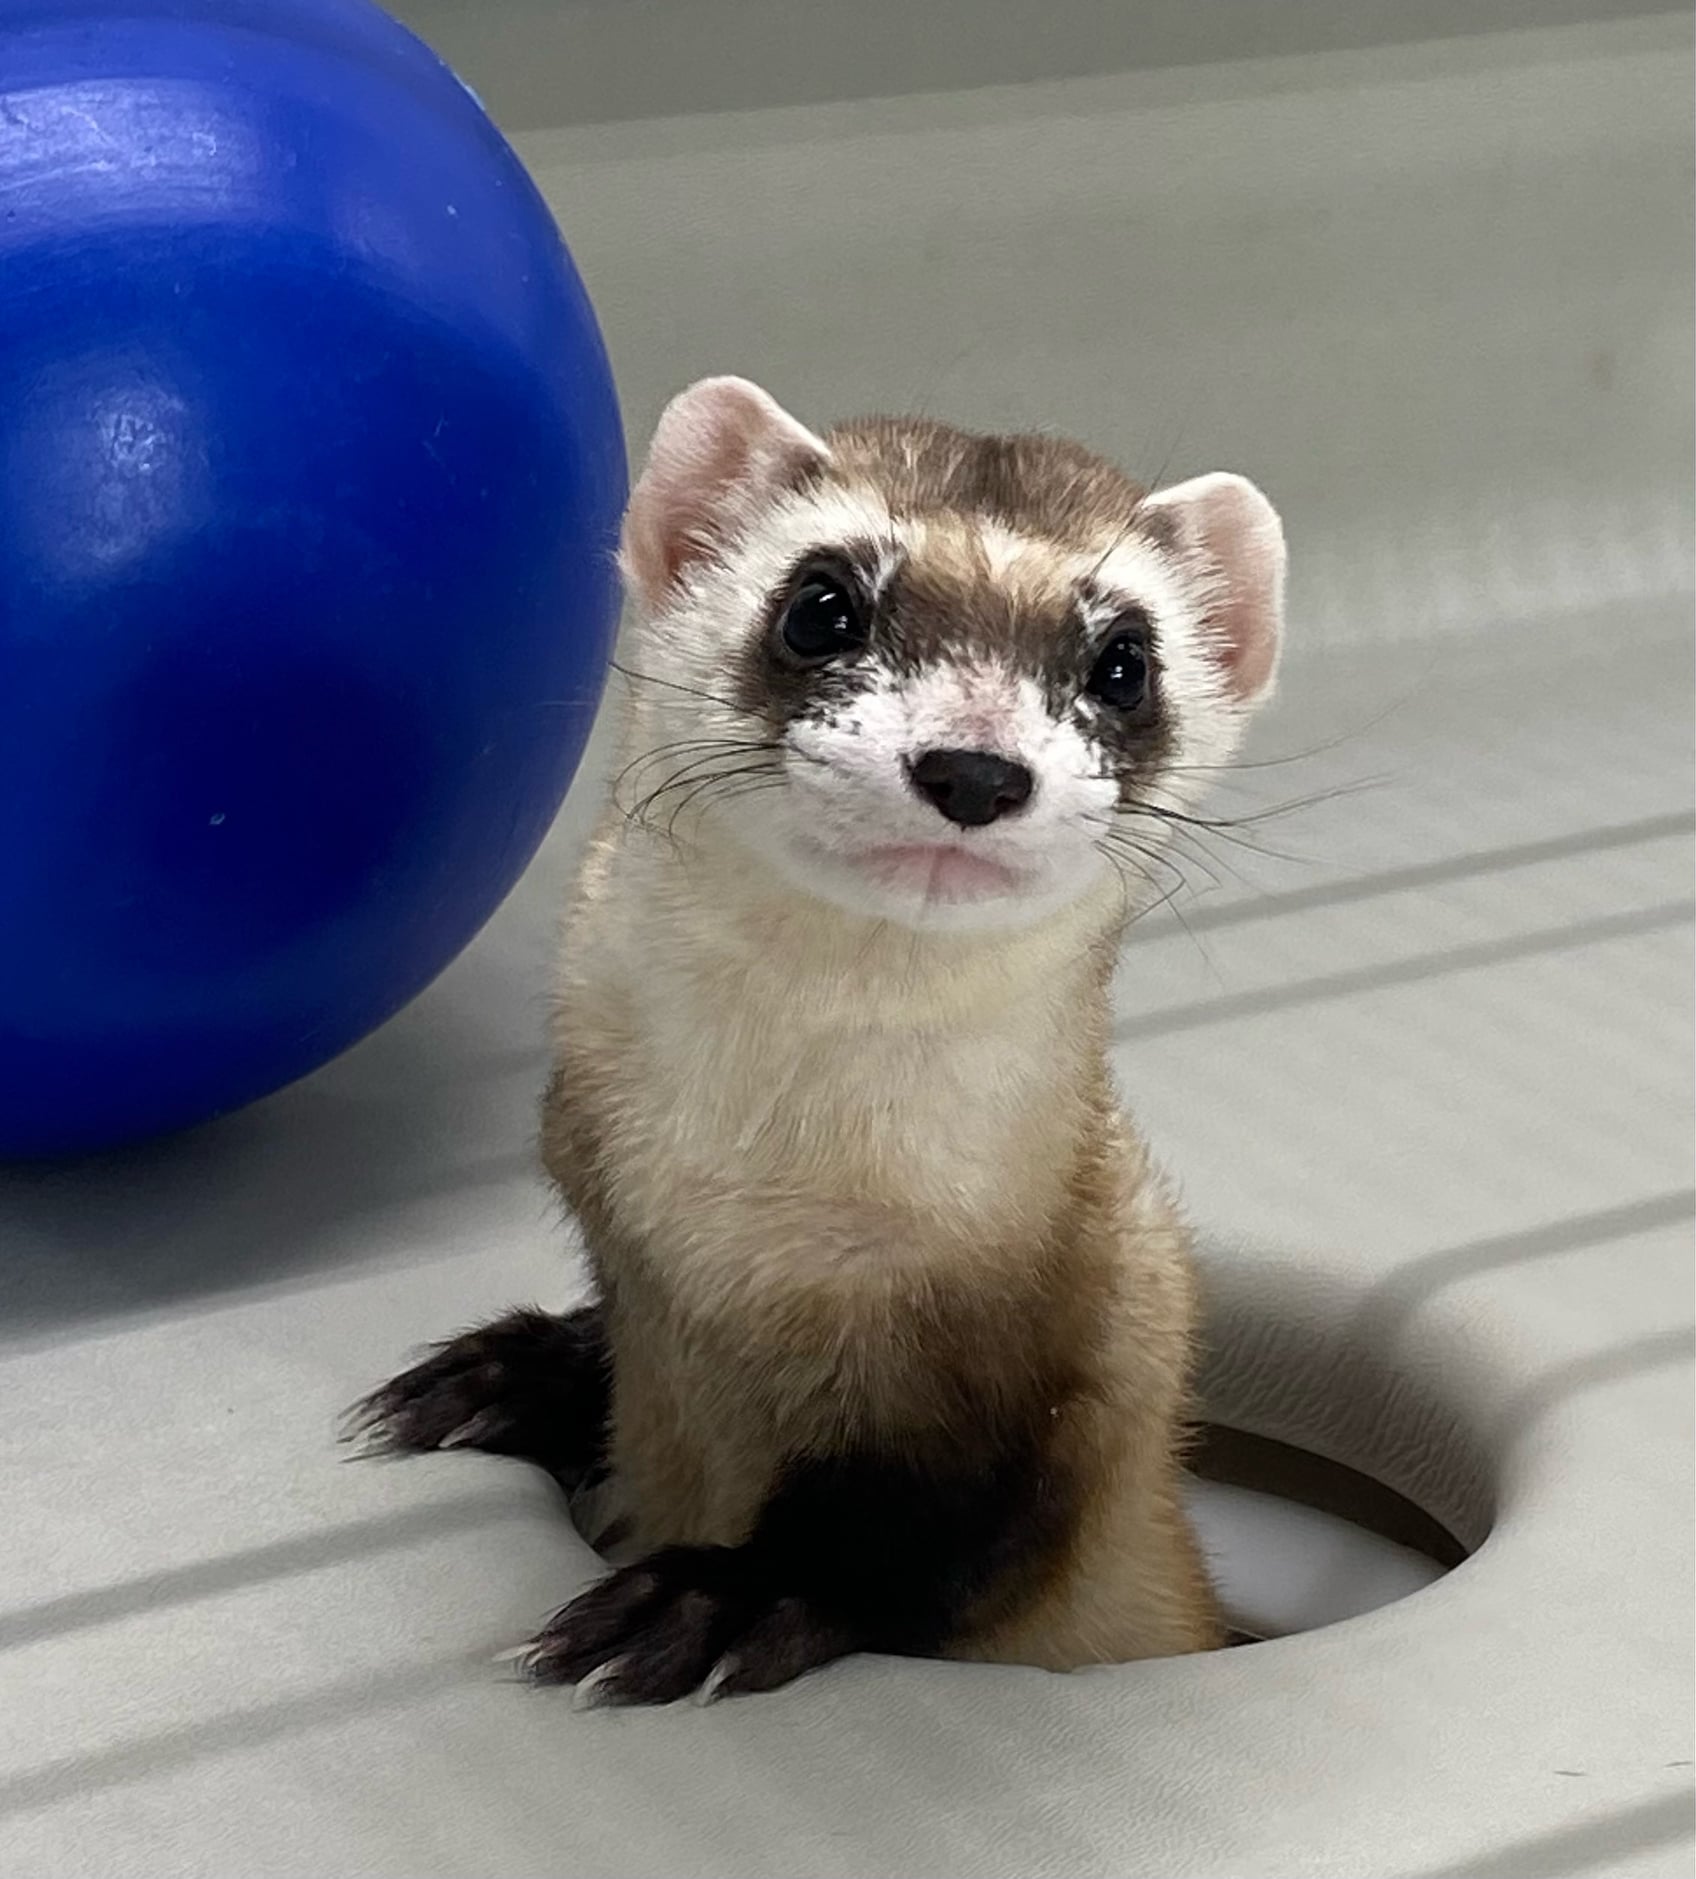 Elizabeth Ann, a Black-footed ferret, staring at the camera with a ball in the background